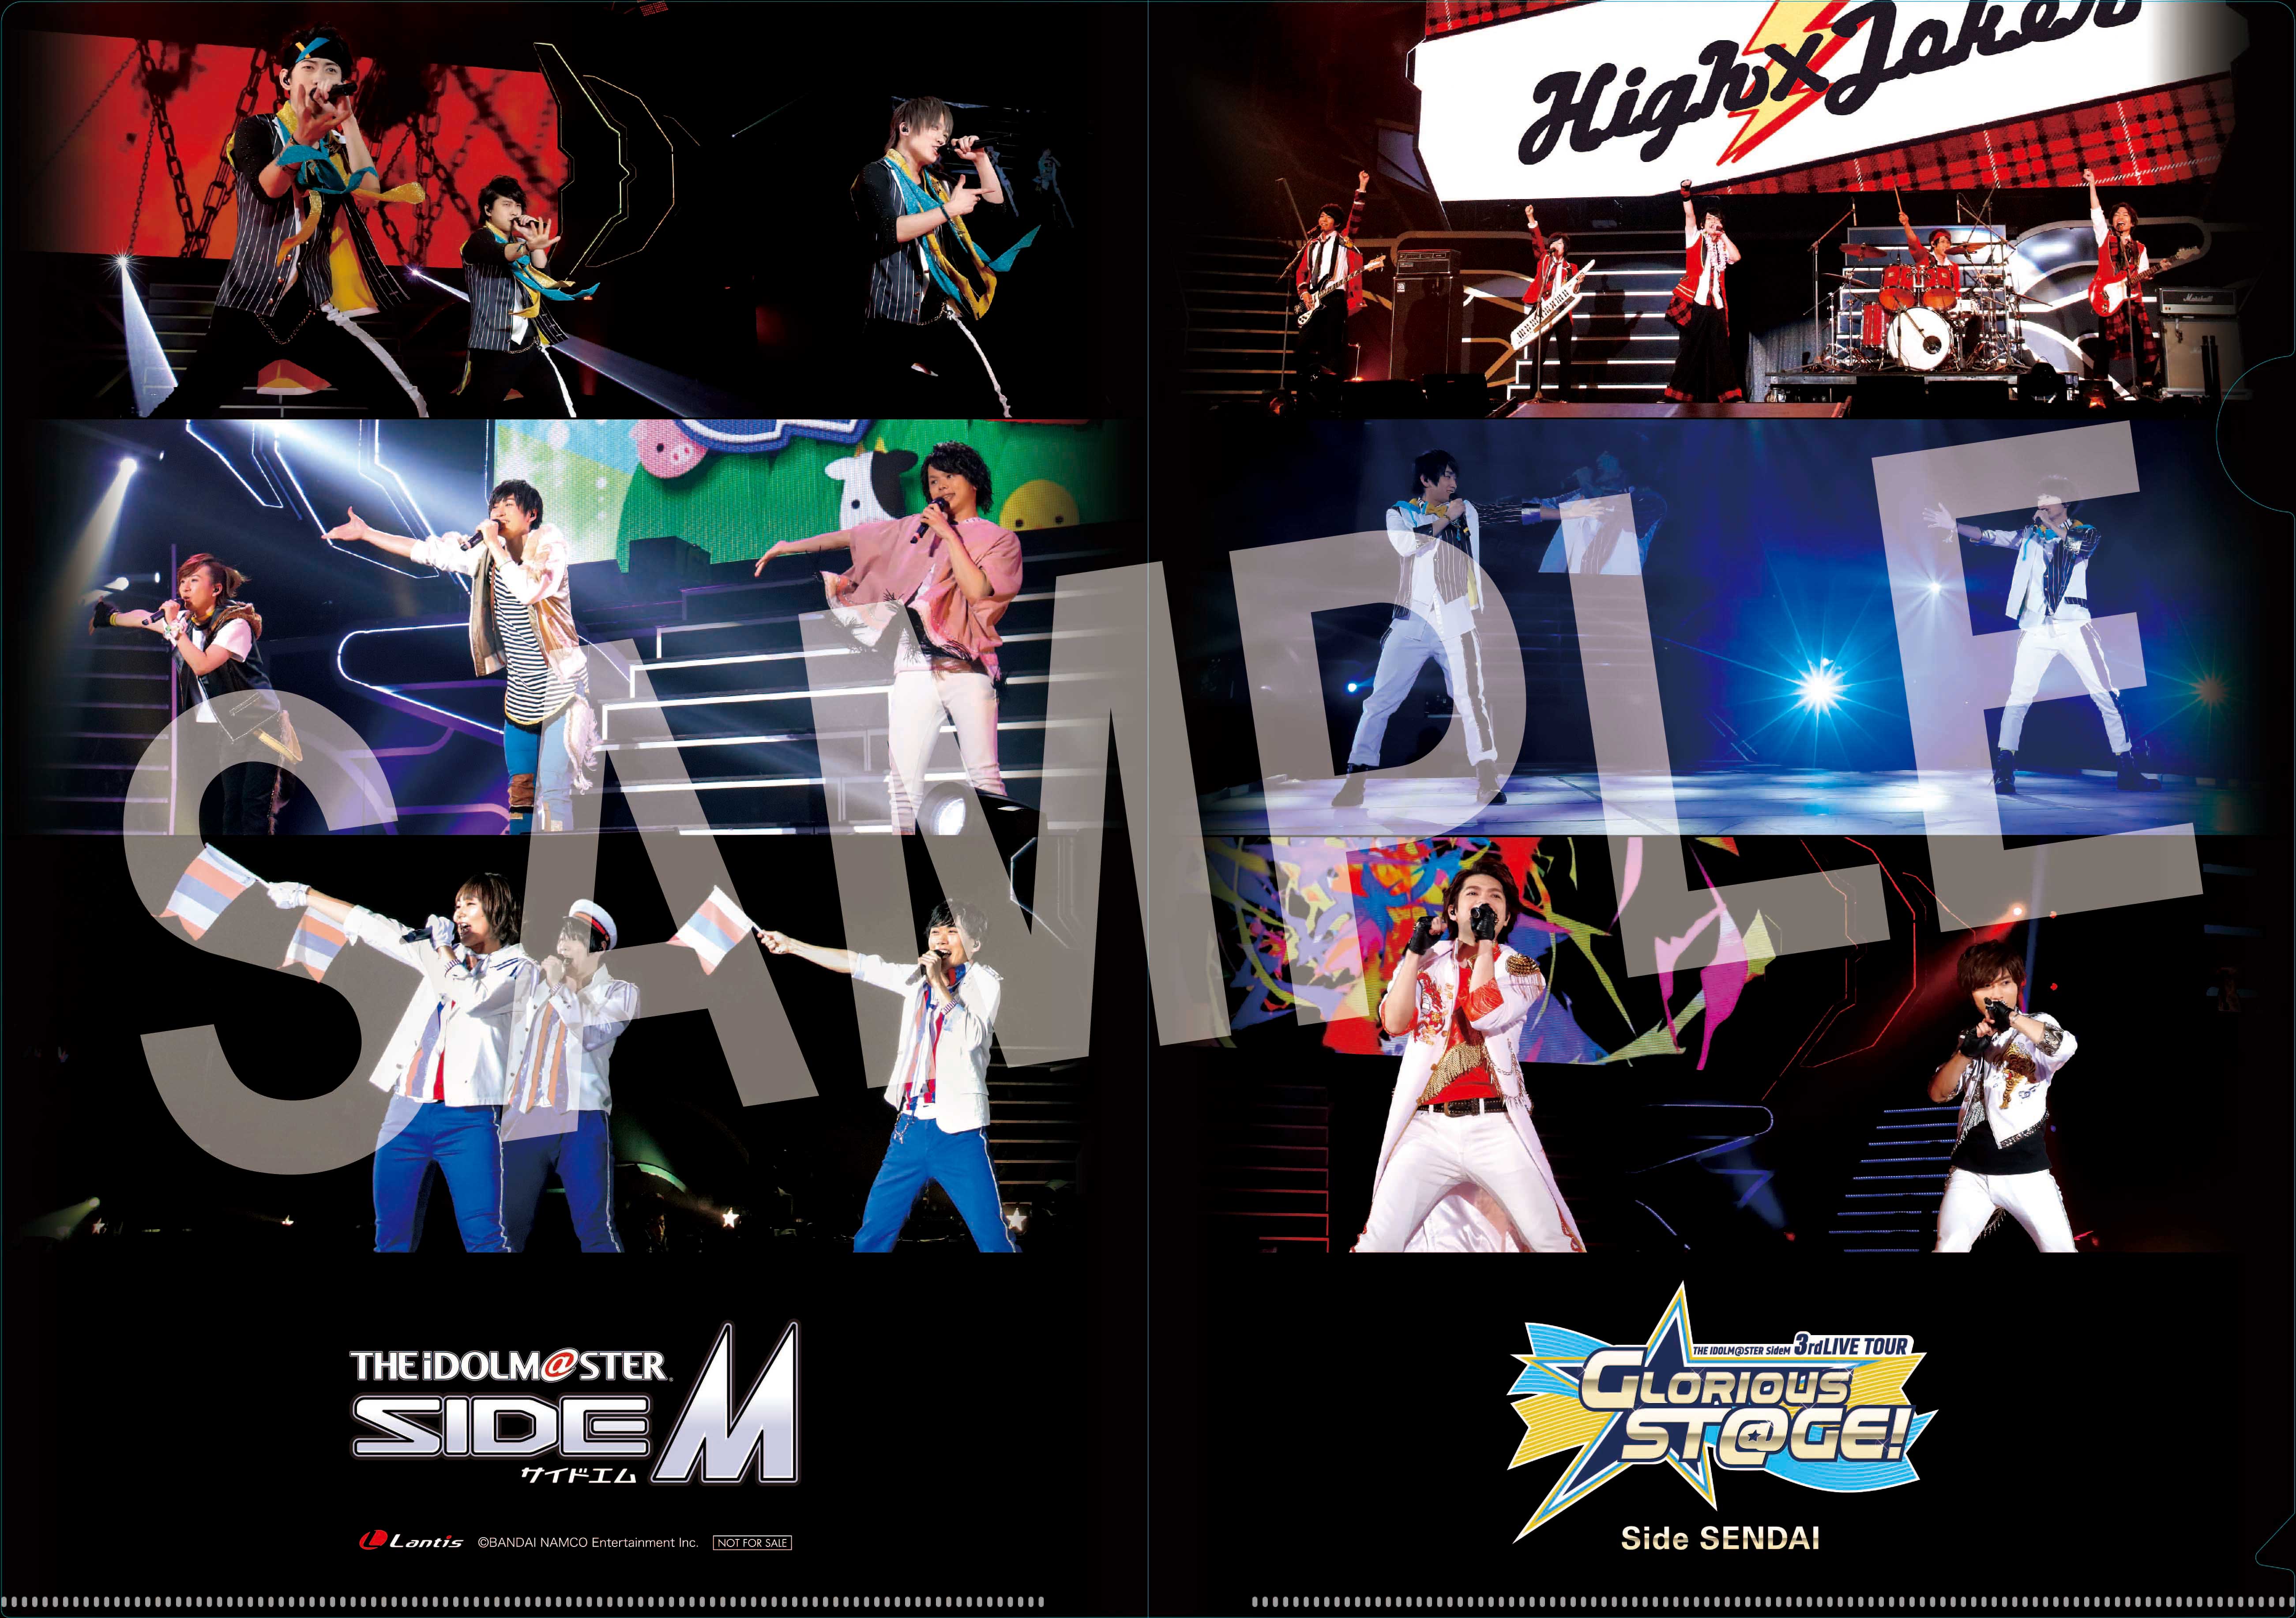 THE IDOLM@STER SideM 3rdLIVE TOUR